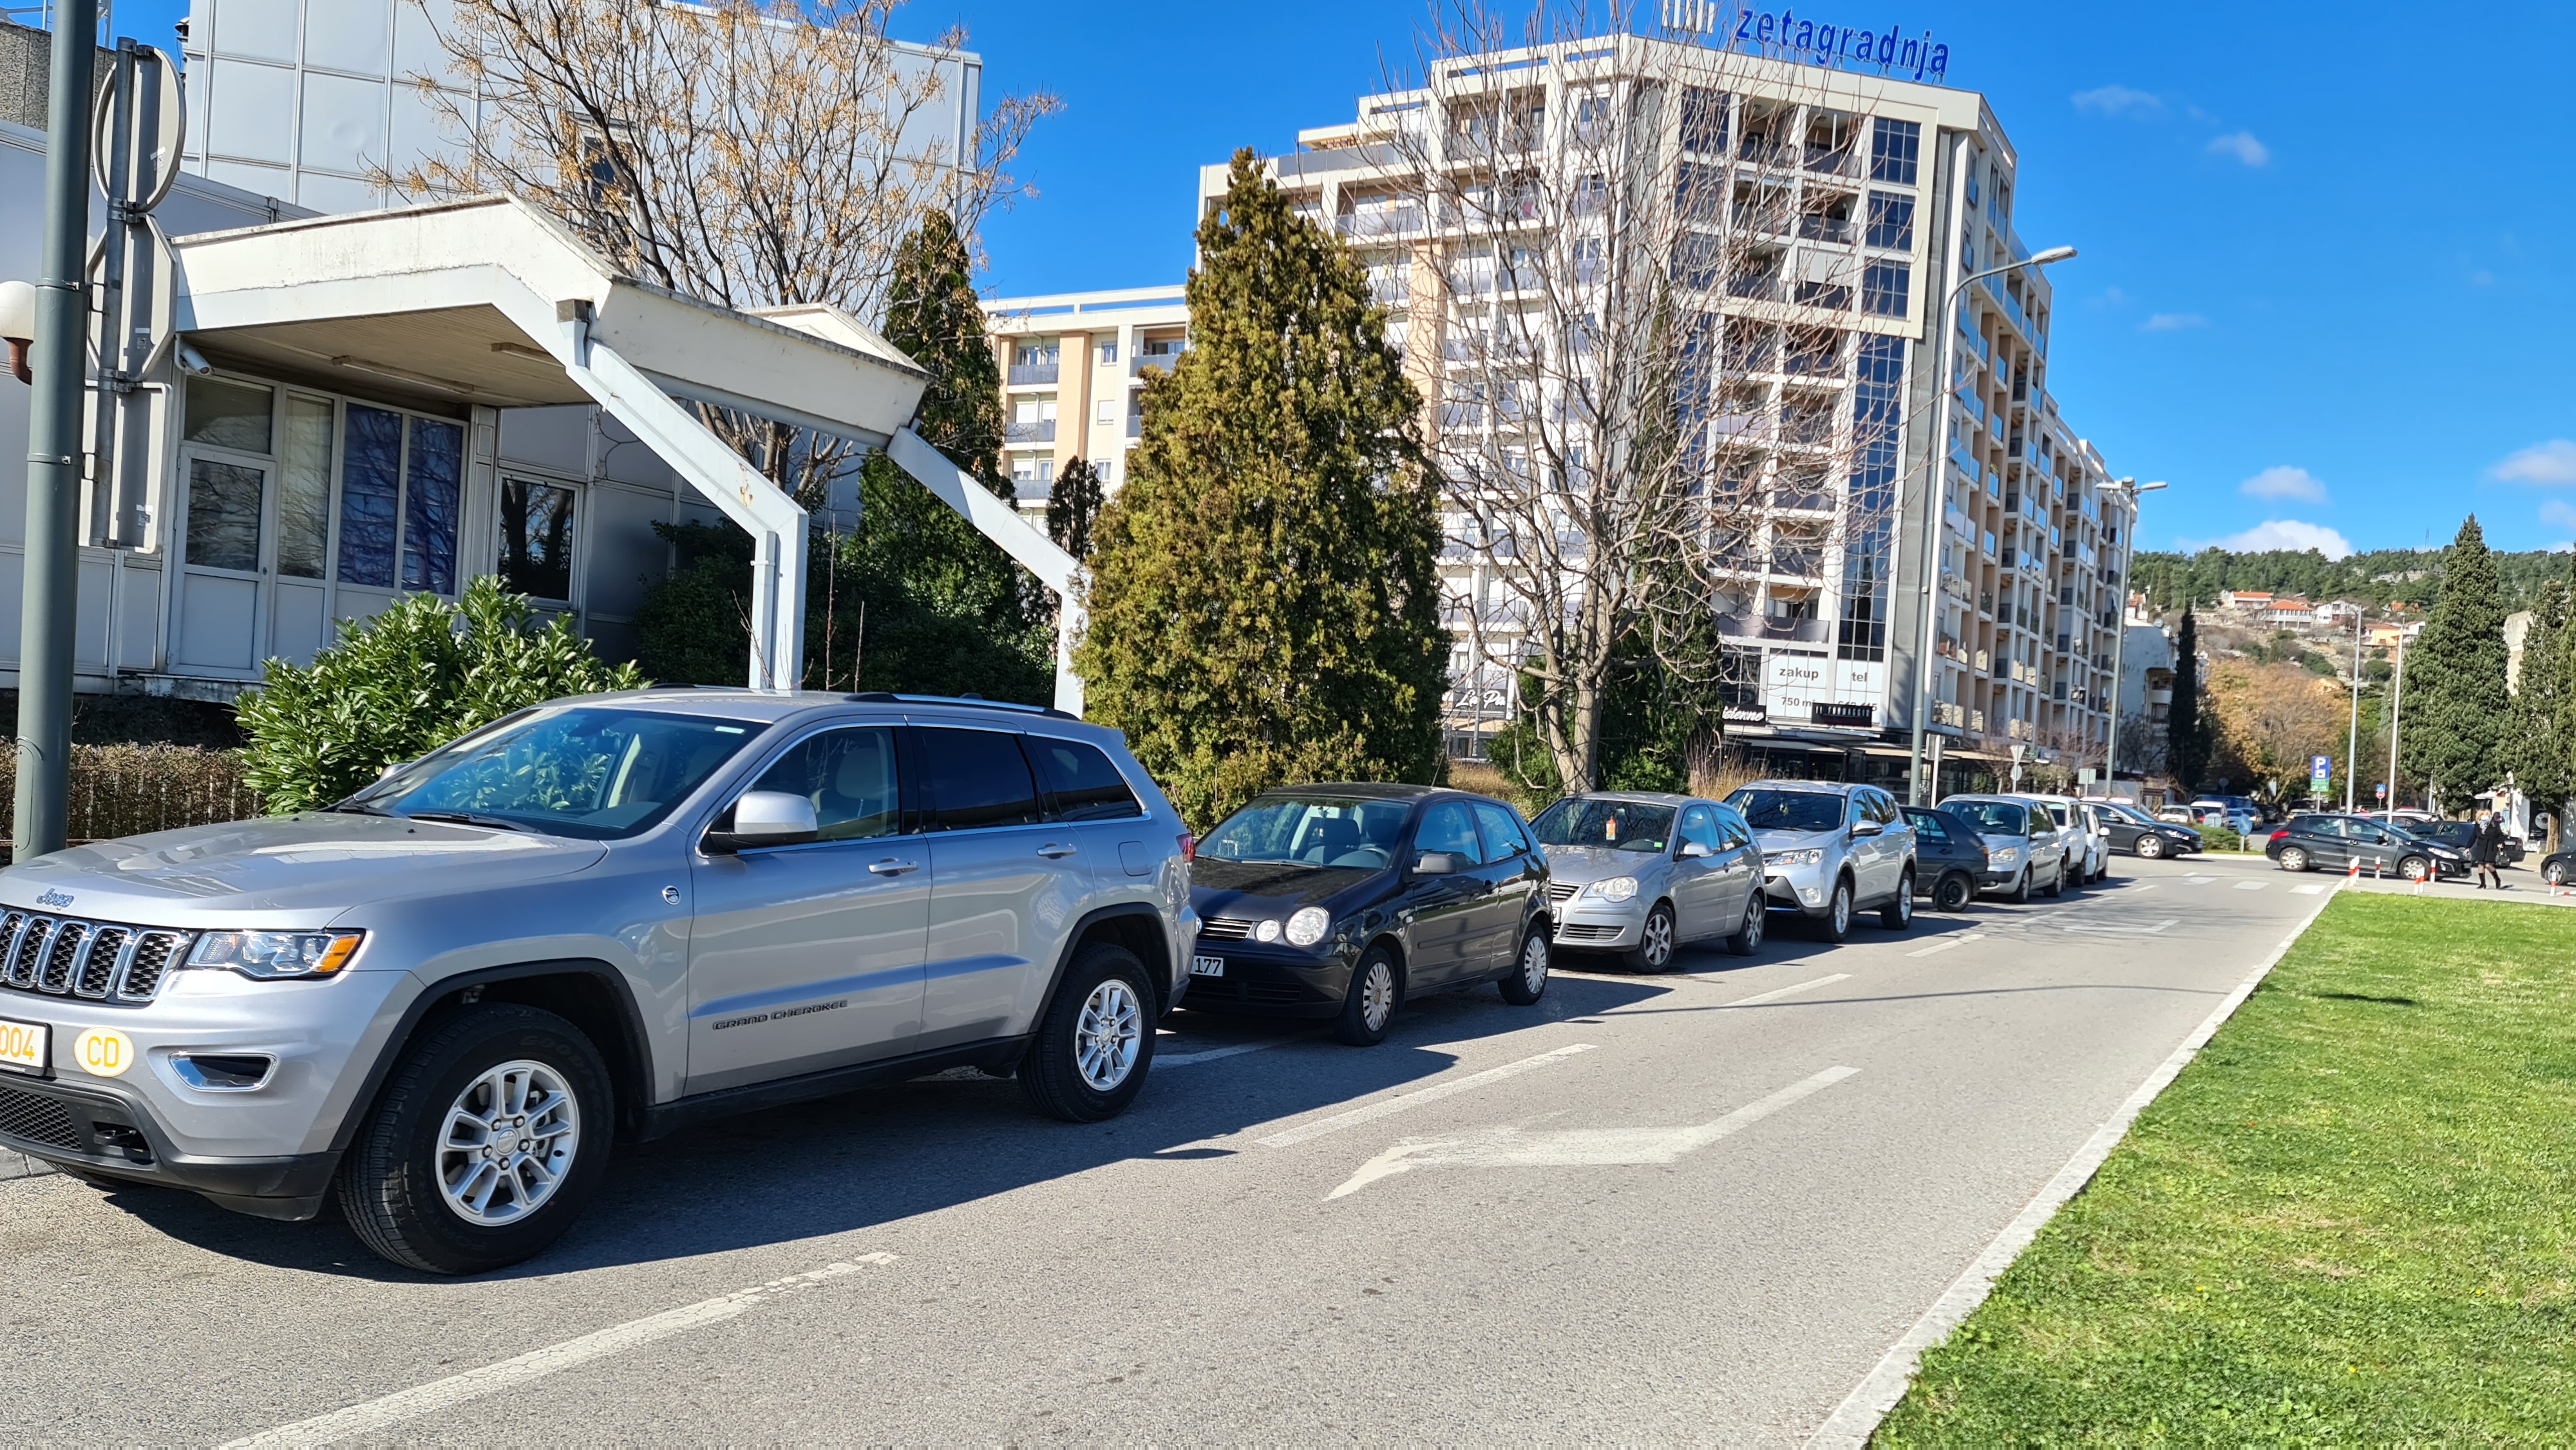 Appeal to citizens to comply with regulations; Having the parking lot, unscrupulous drivers still use sidewalks and road trails